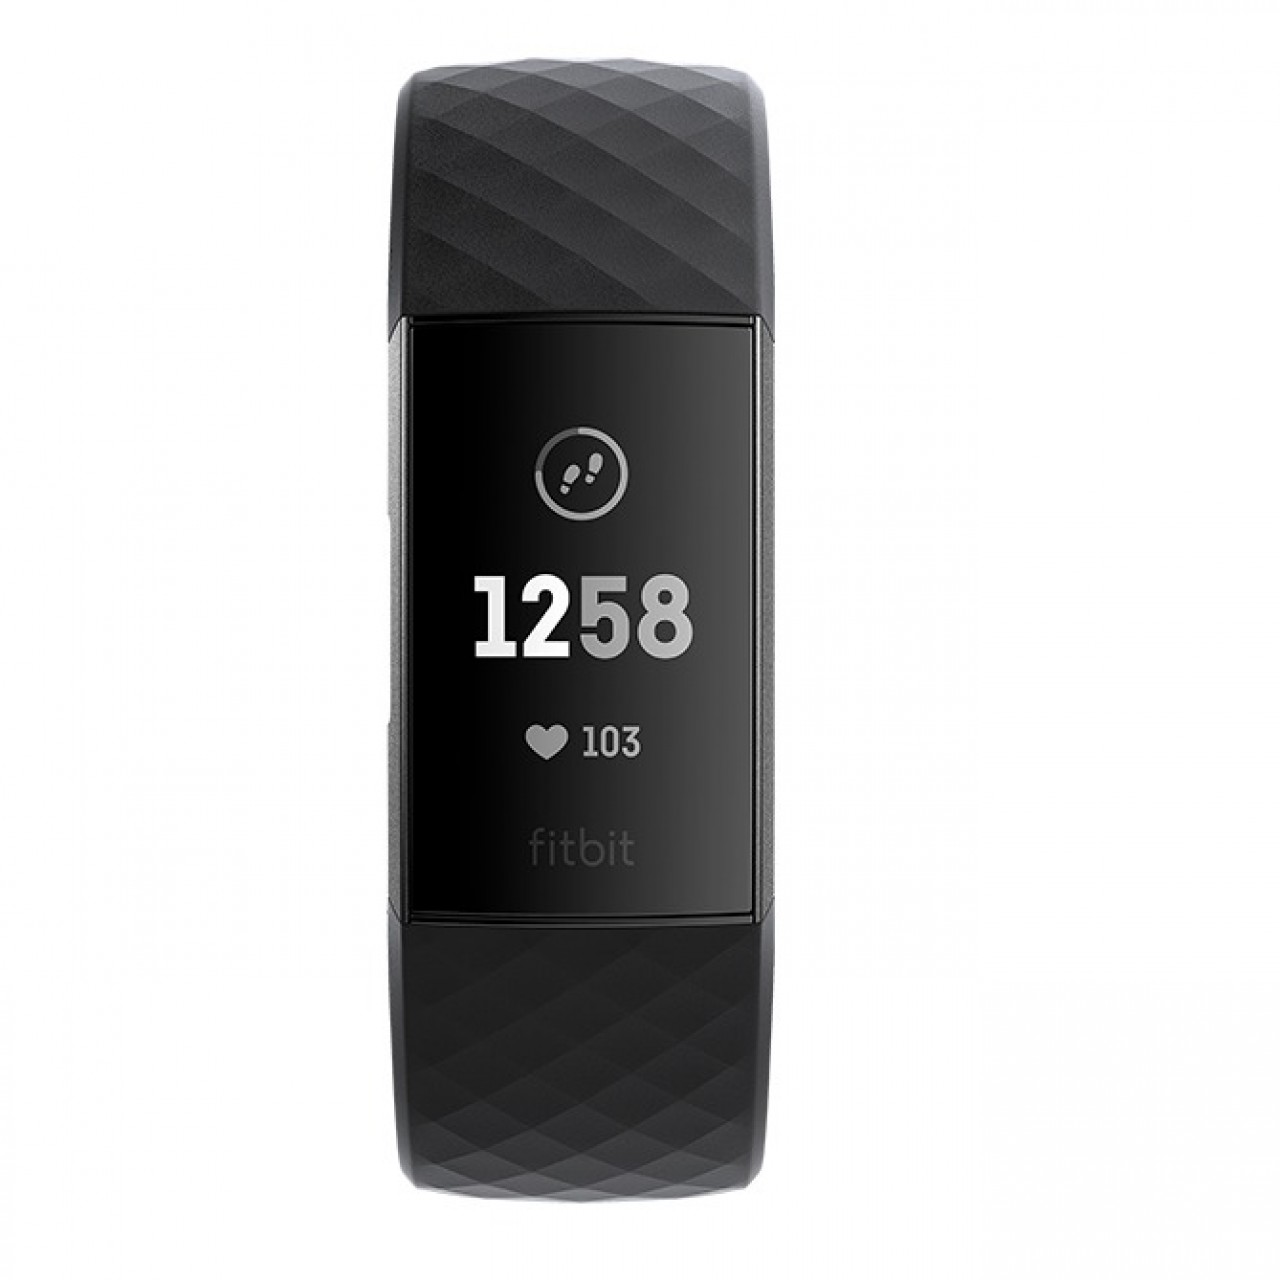 Fitbit Charge 3 Smart Watch - Black Aluminum Tracker